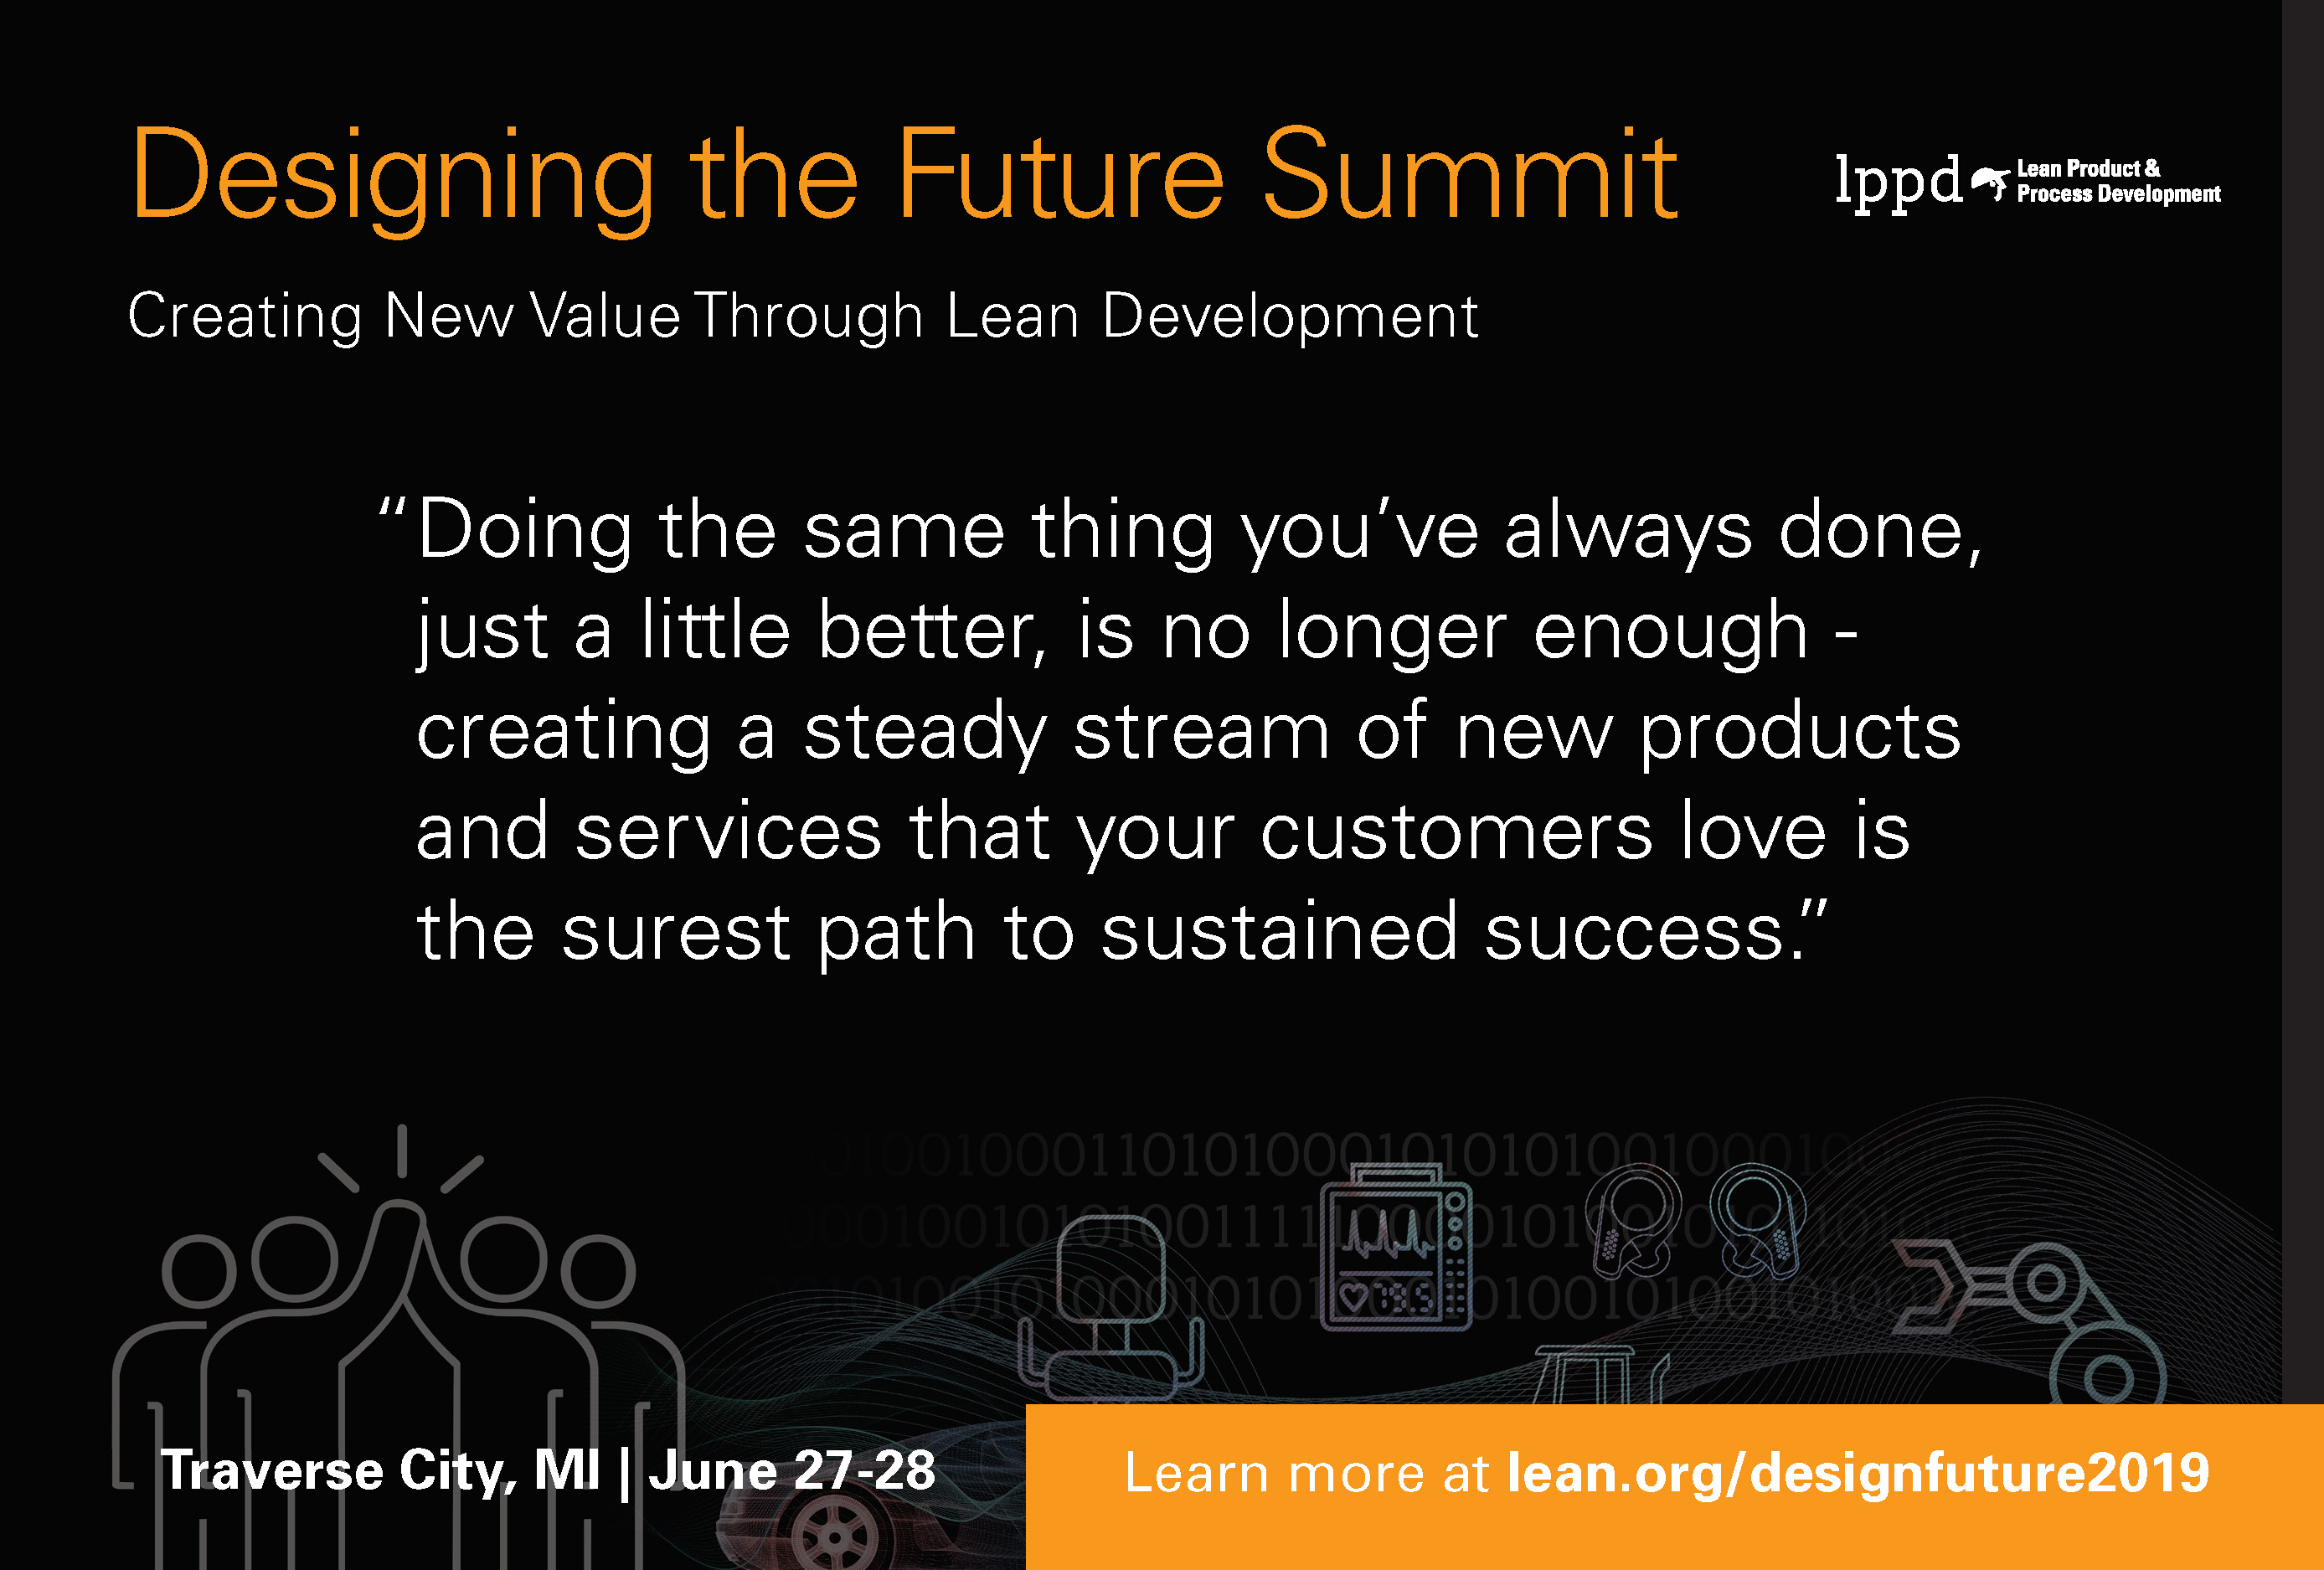 The next Designing the Future Summit is set for June 17-18, 2020.